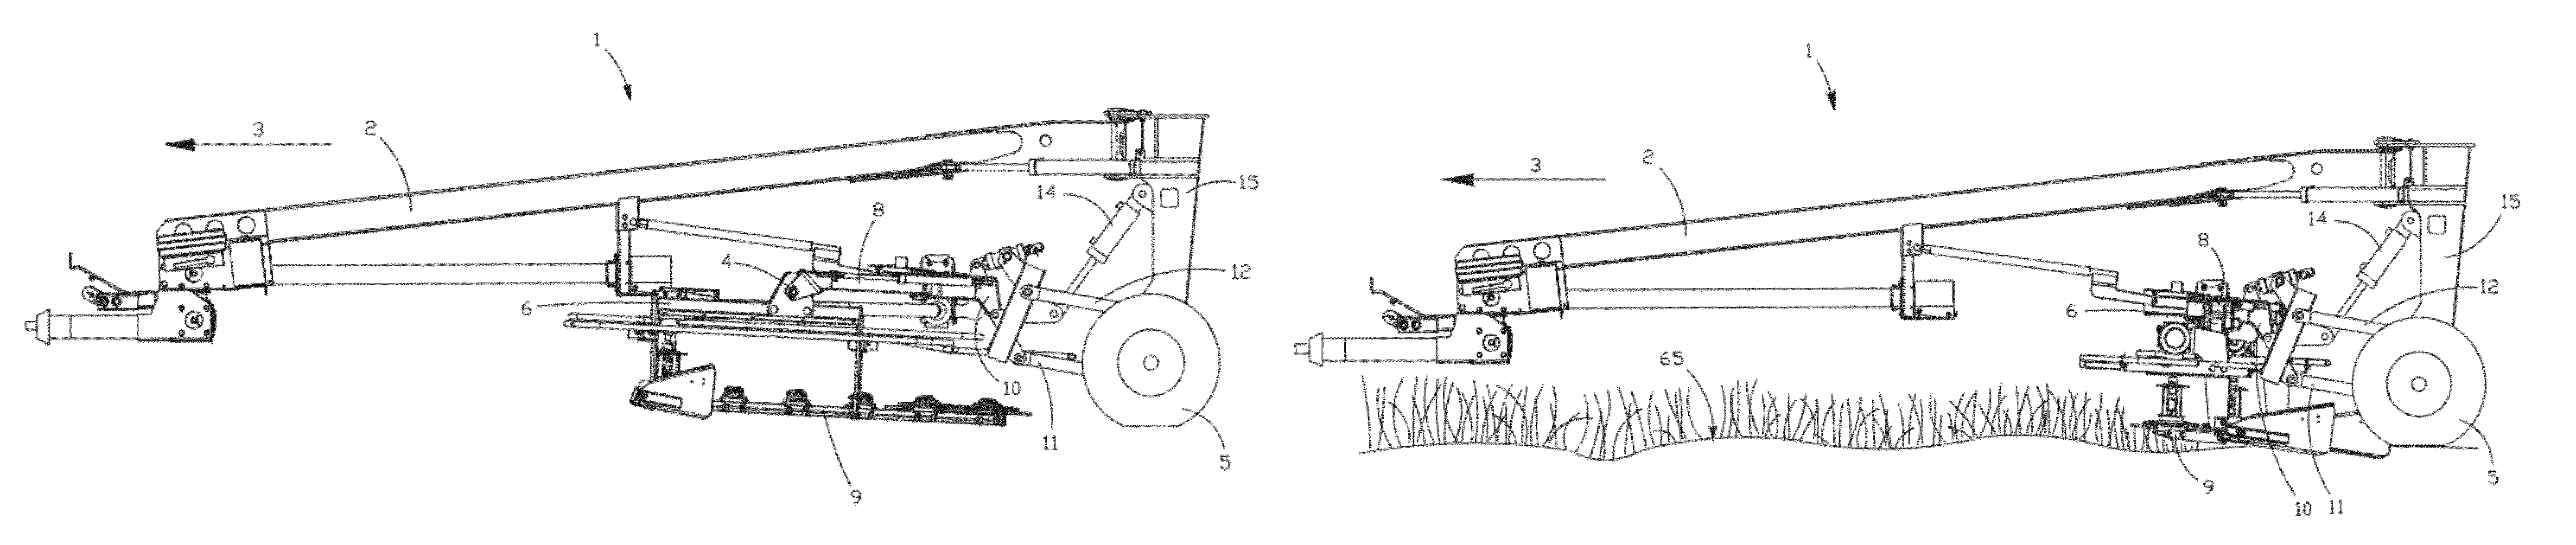 Self-leveling four-bar linkage for suspending a header of an agricultural implement